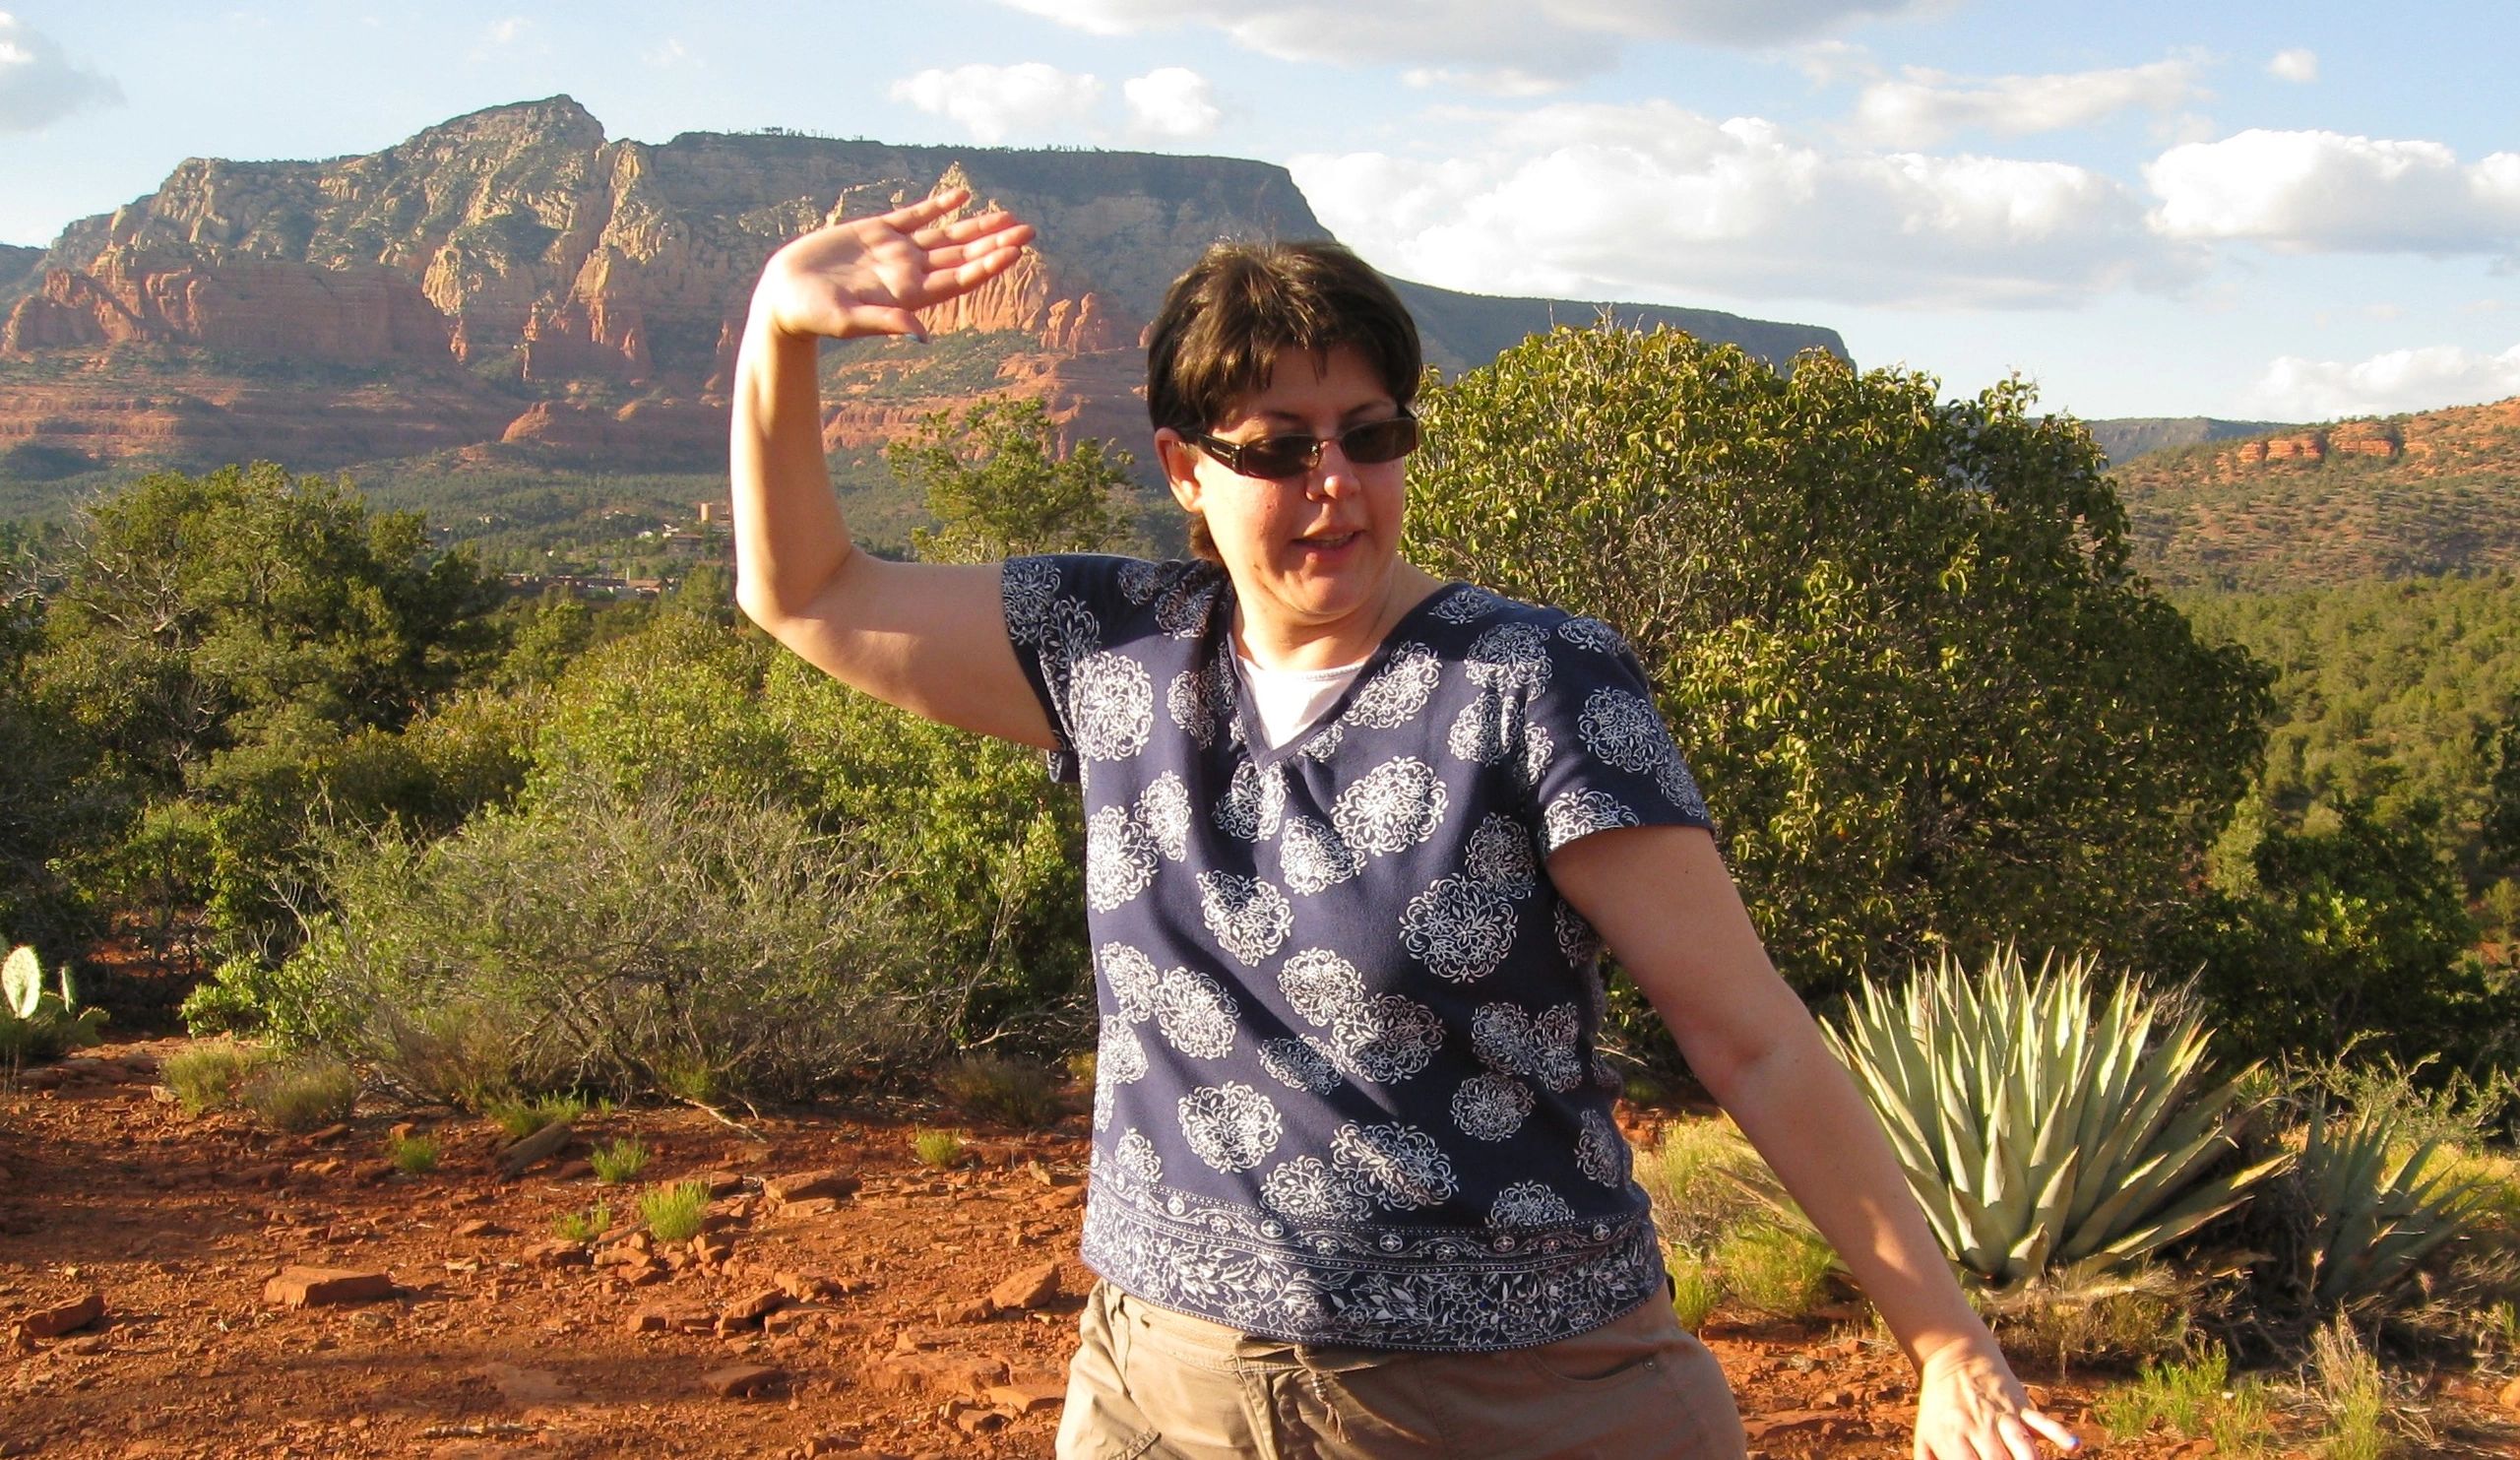 Woman practicing Tai Chi with the landscape of Sedona in the background